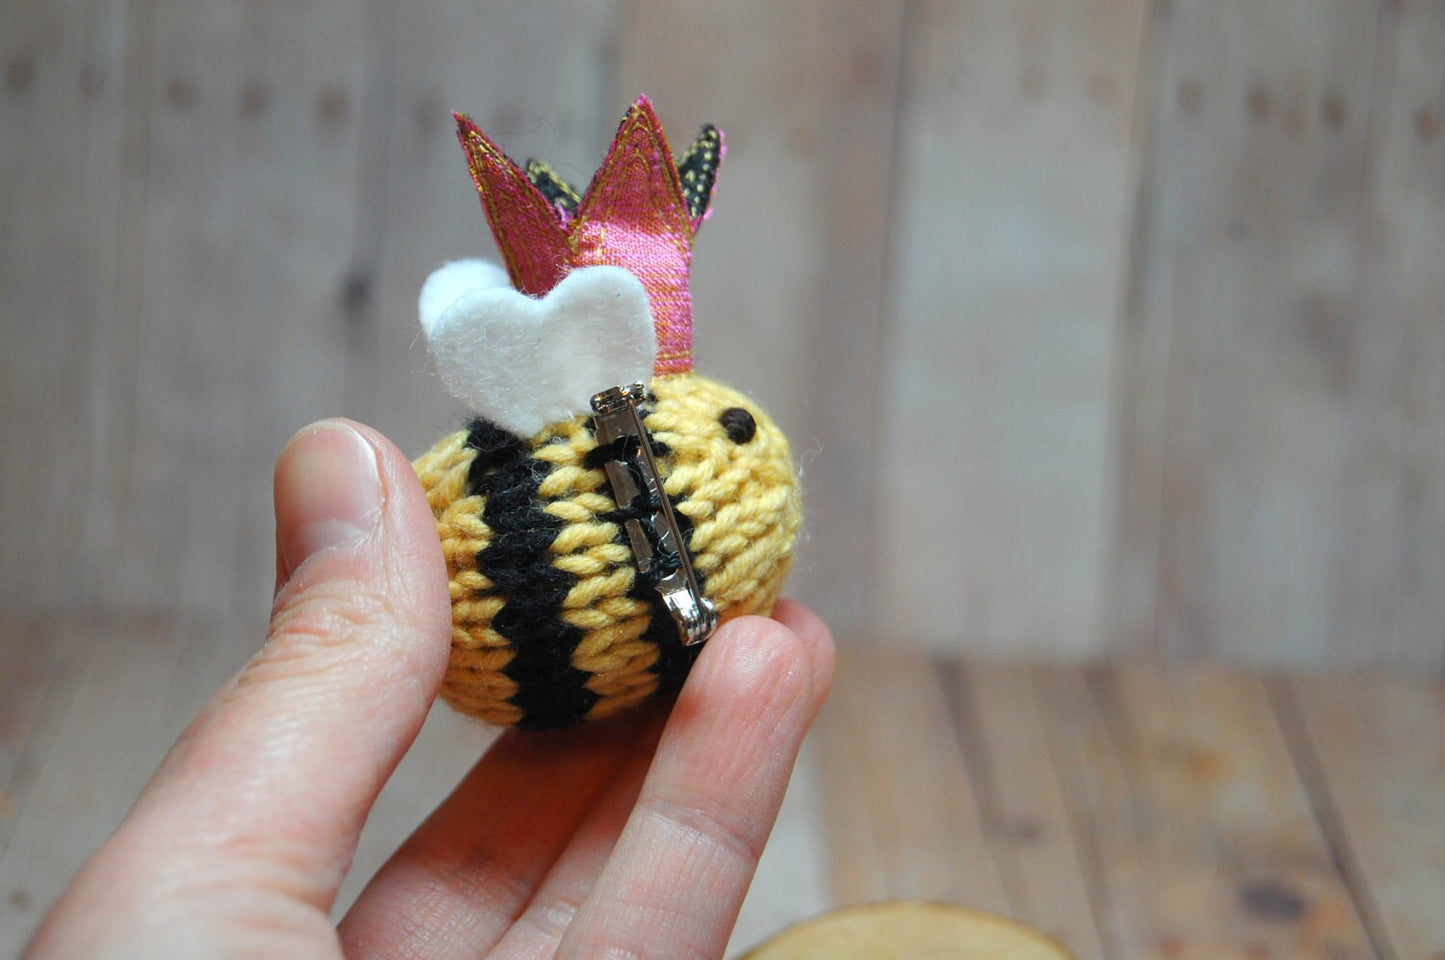 Queen Bee Brooch or Ornament, Knit Wool Bee with Silk Crown Lapel Pin